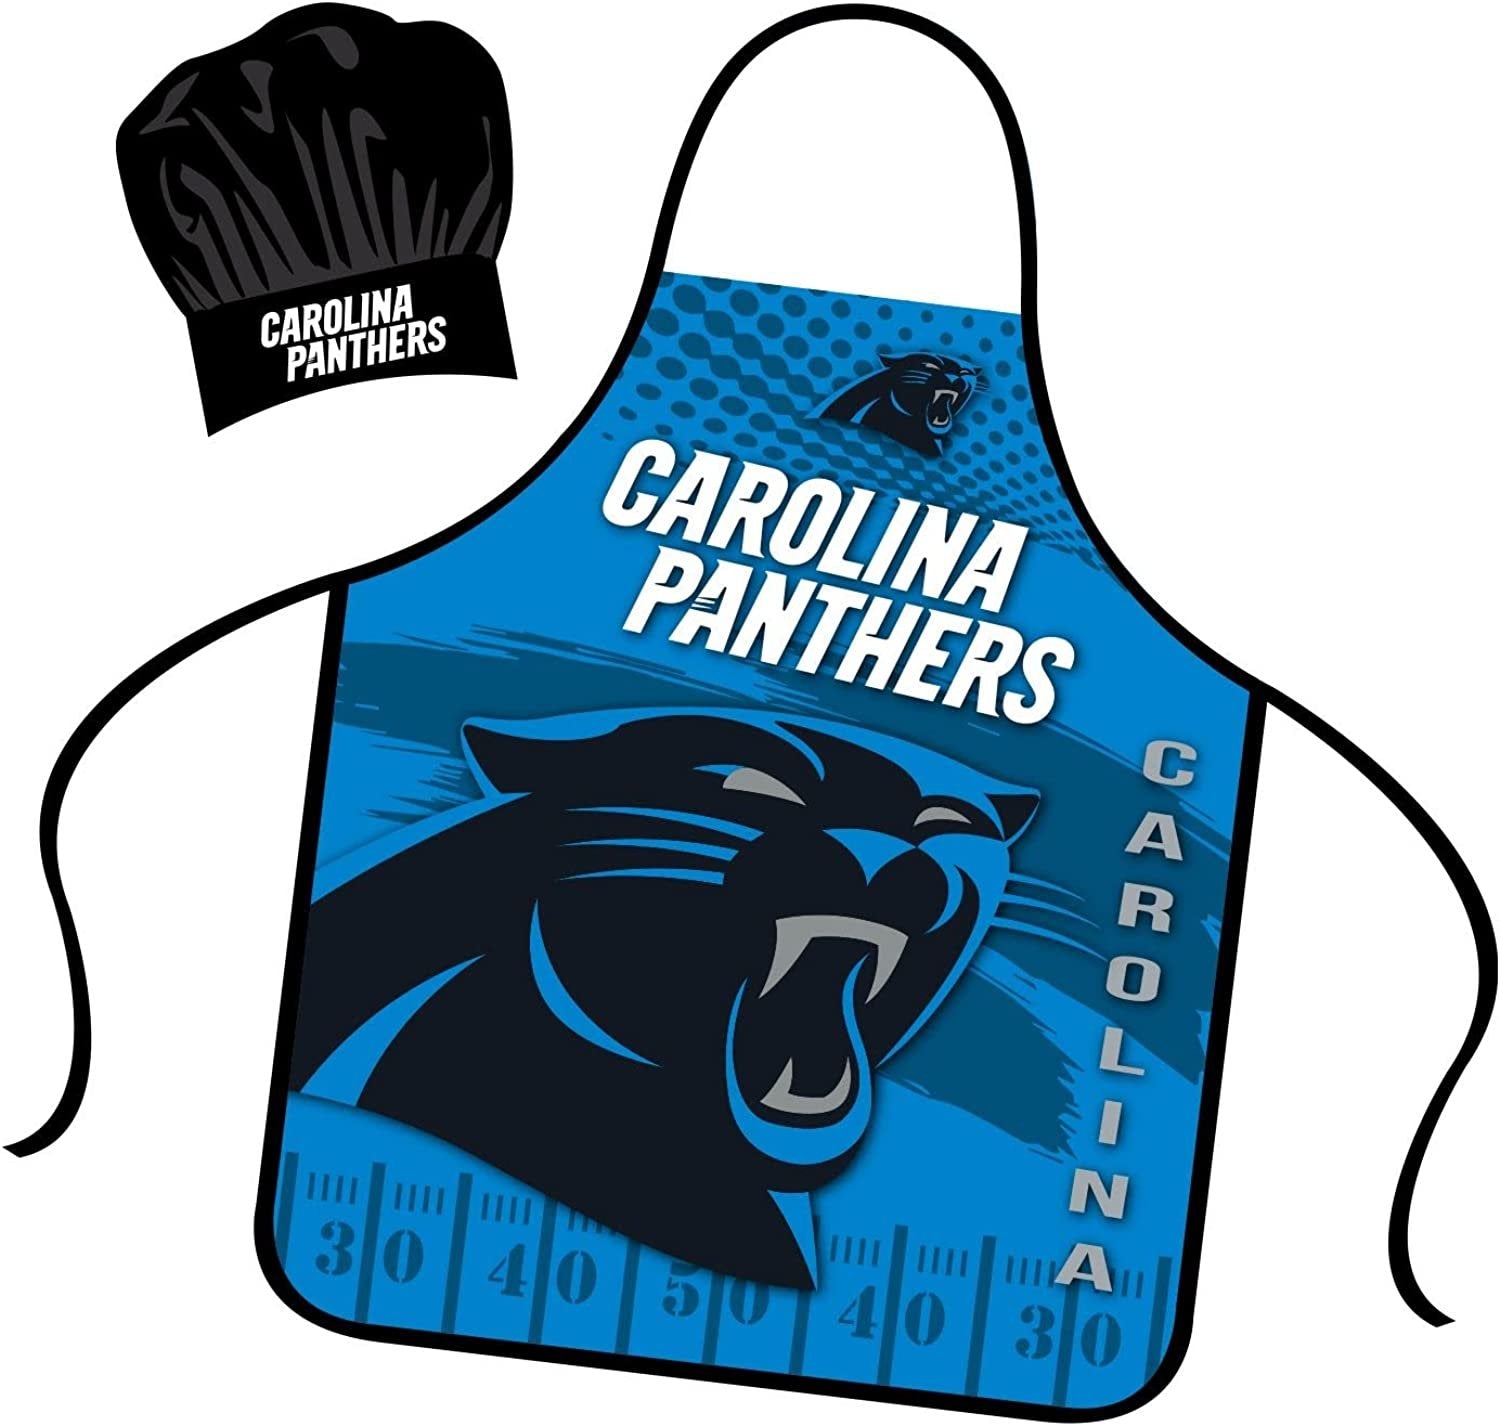 Carolina Panthers Apron Chef Hat Set Full Color Universal Size Tie Back Grilling Tailgate BBQ Cooking Host